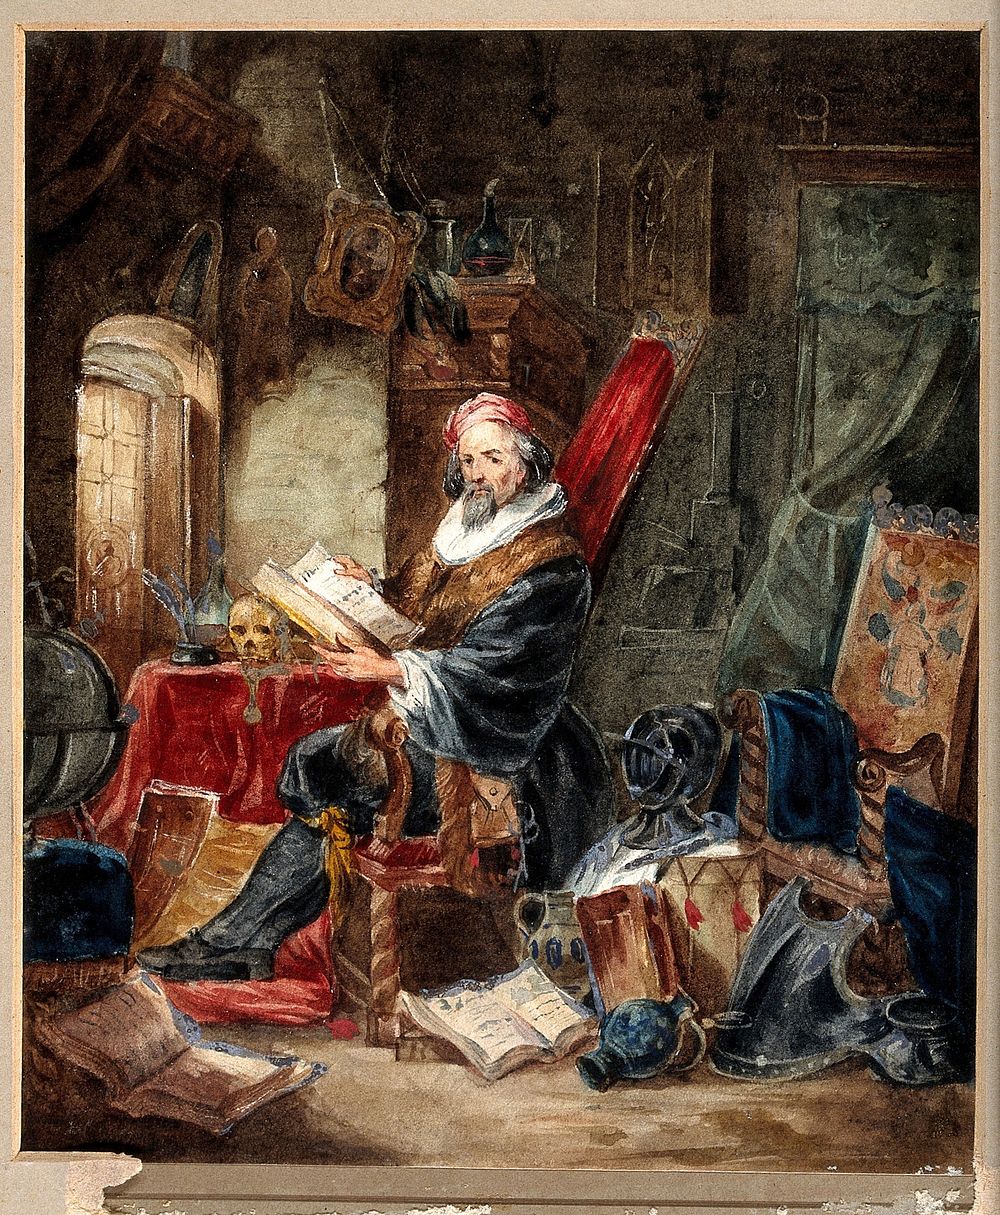 An alchemist reading in a romanticised laboratory setting. Watercolour painting, 19th century.